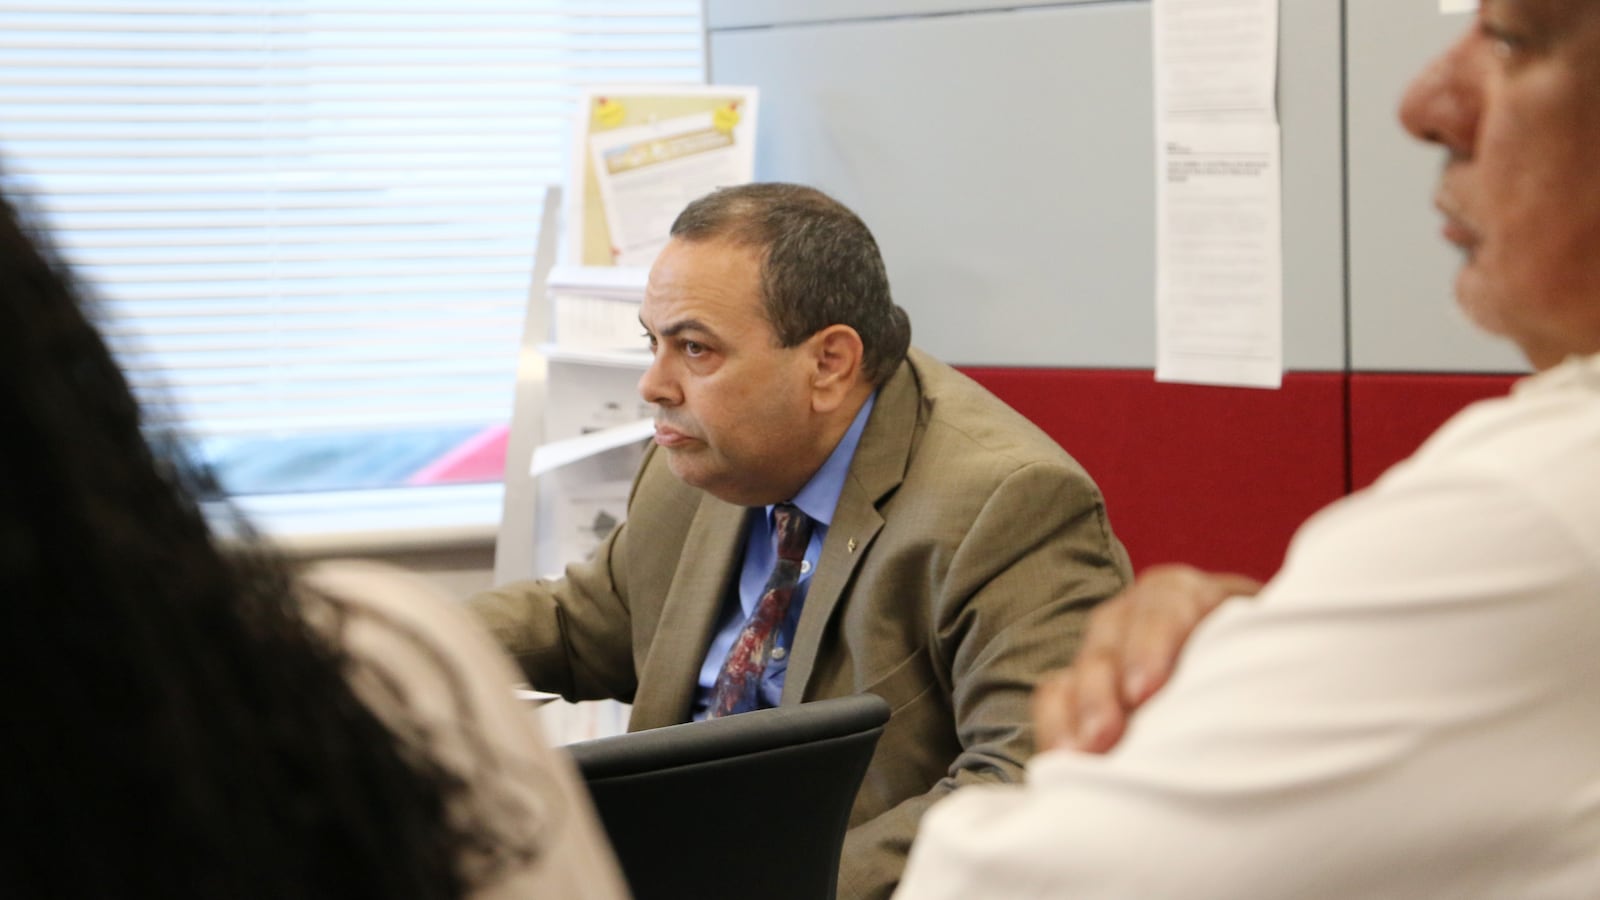 In his first four months on the job, Superintendent Roger León has hinted at many upcoming changes. Now, the board is calling on him to produce a clear plan with concrete goals.